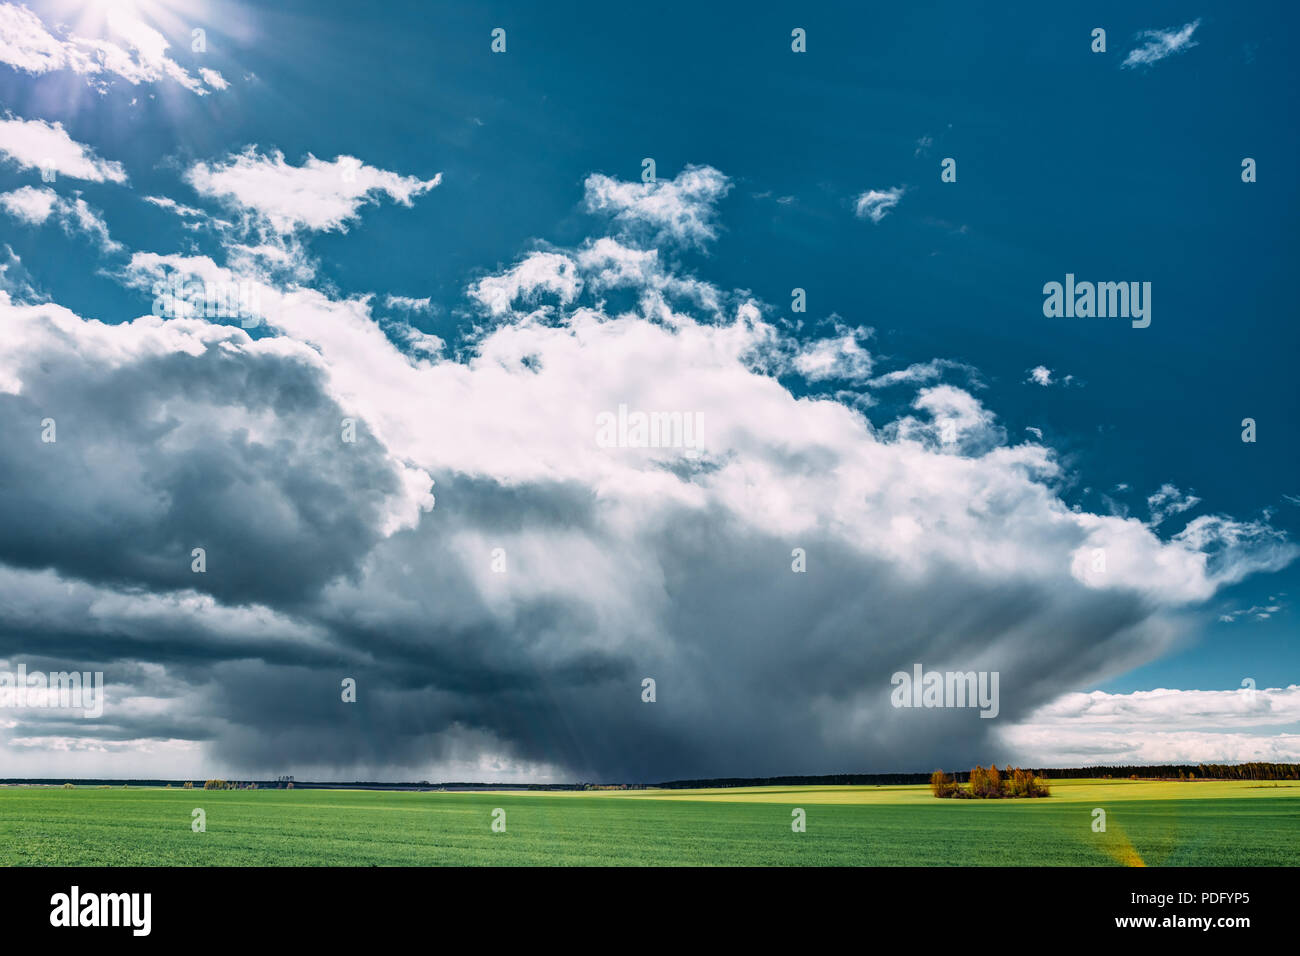 Coming Storm And Rain Above Countryside Rural Field Or Meadow Landscape With Green Grass Under Scenic Spring Blue Dramatic Sky With White Fluffy Cloud Stock Photo